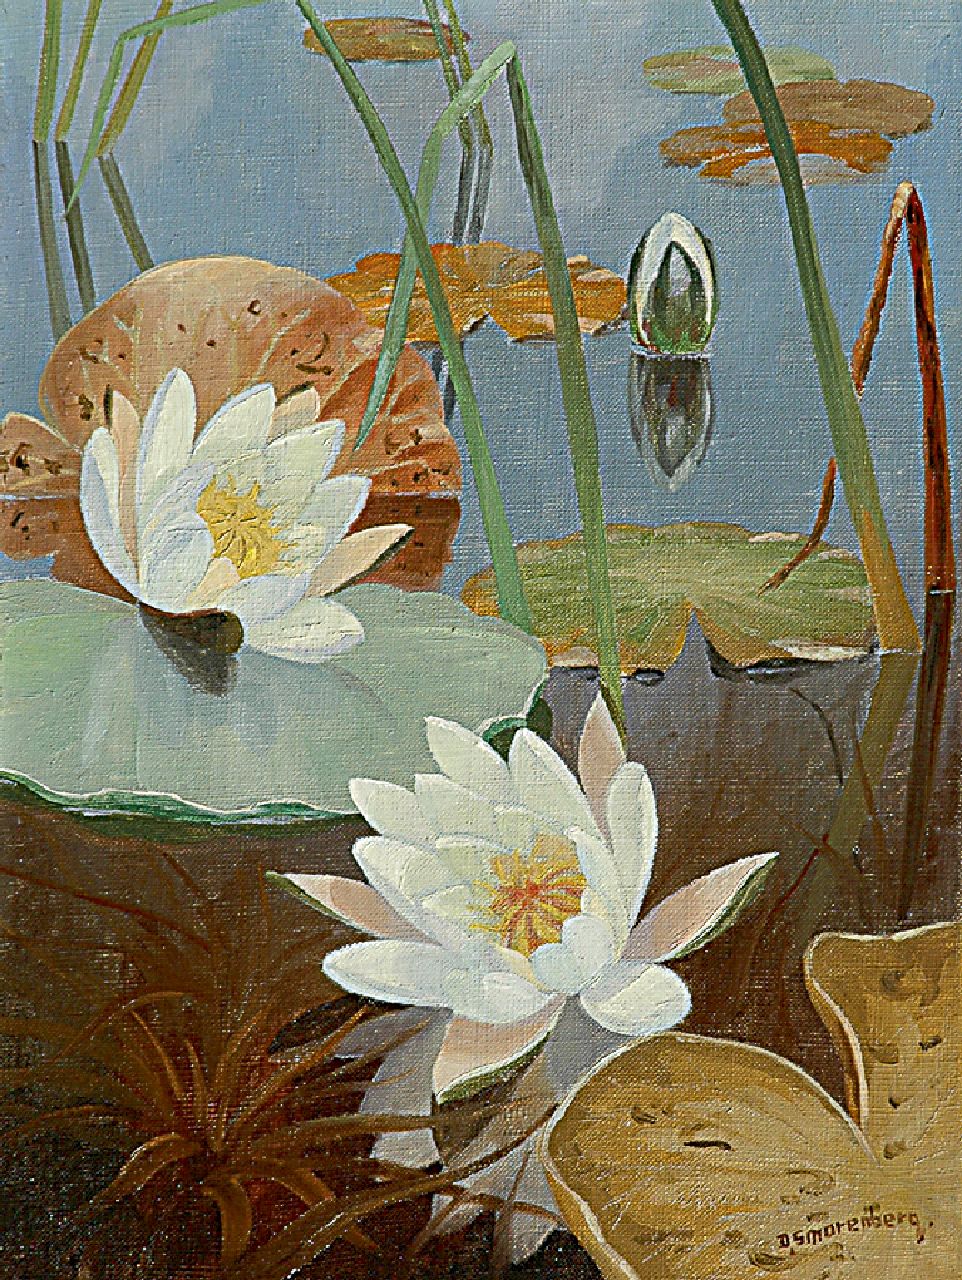 Smorenberg D.  | Dirk Smorenberg, Water lilies, oil on canvas 40.4 x 30.6 cm, signed l.r.